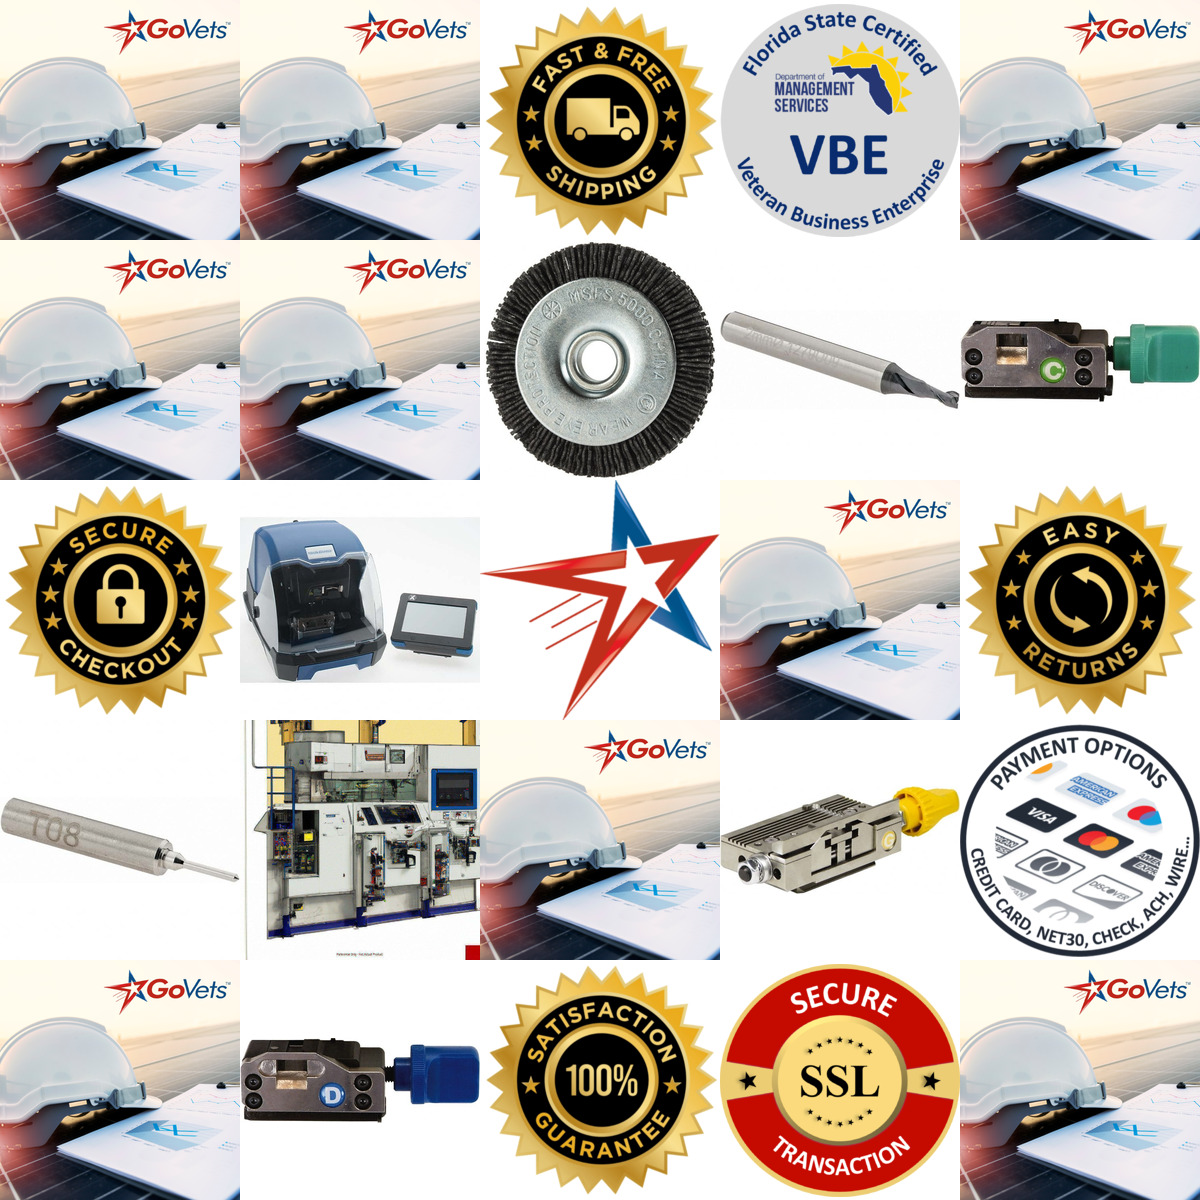 A selection of Key Machines products on GoVets